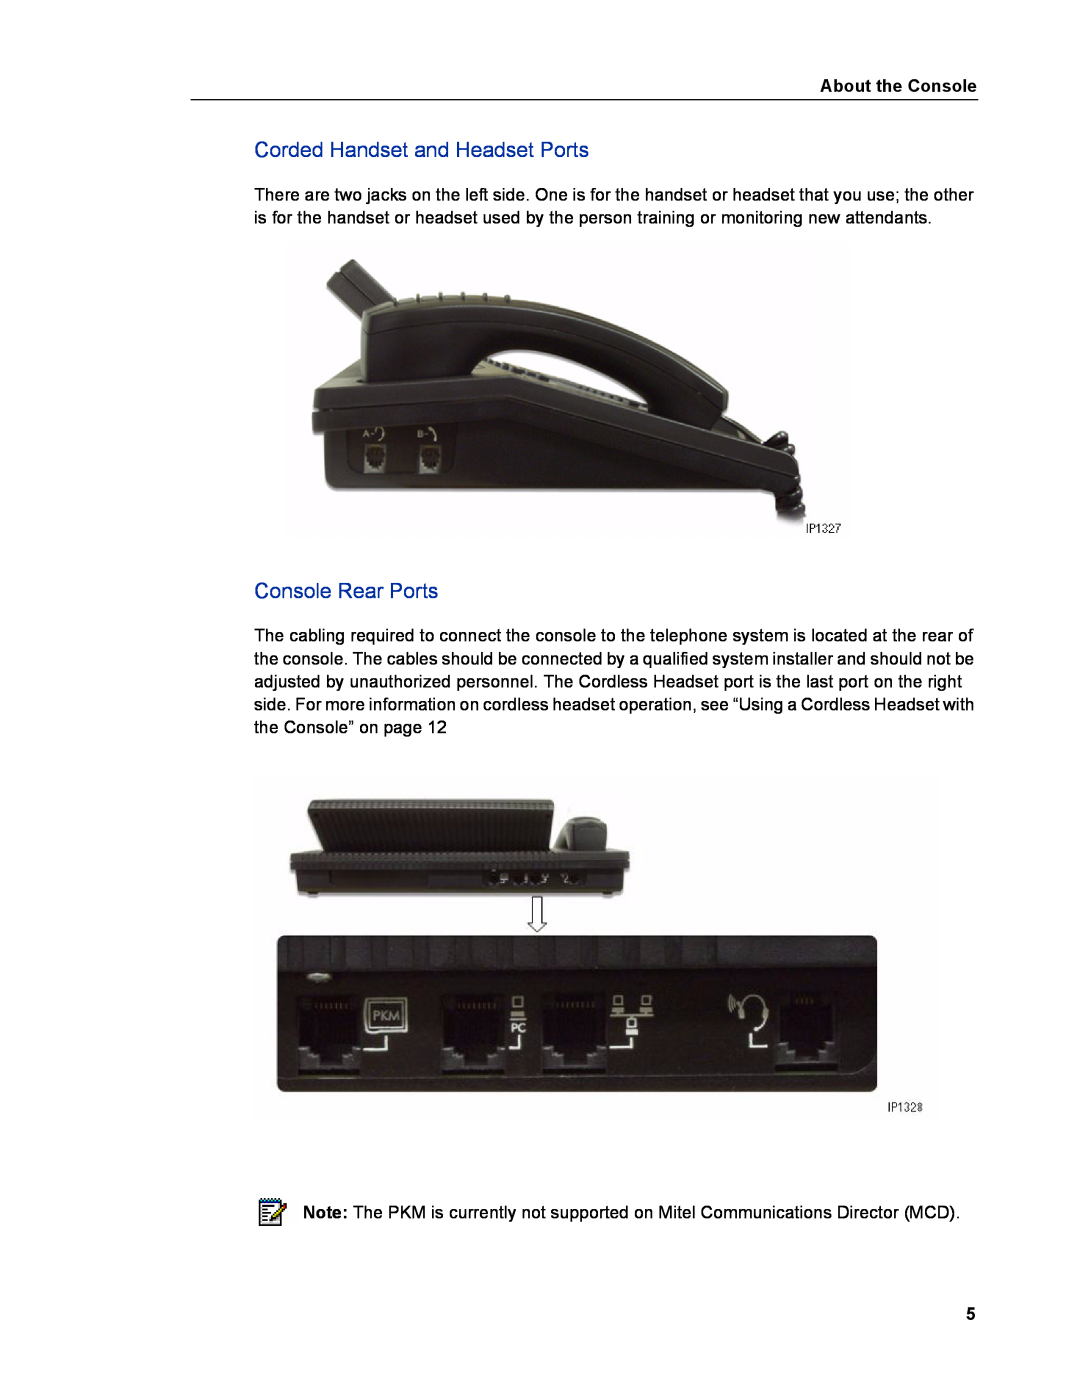 Mitel 5540 manual Corded Handset and Headset Ports, Console Rear Ports, About the Console 